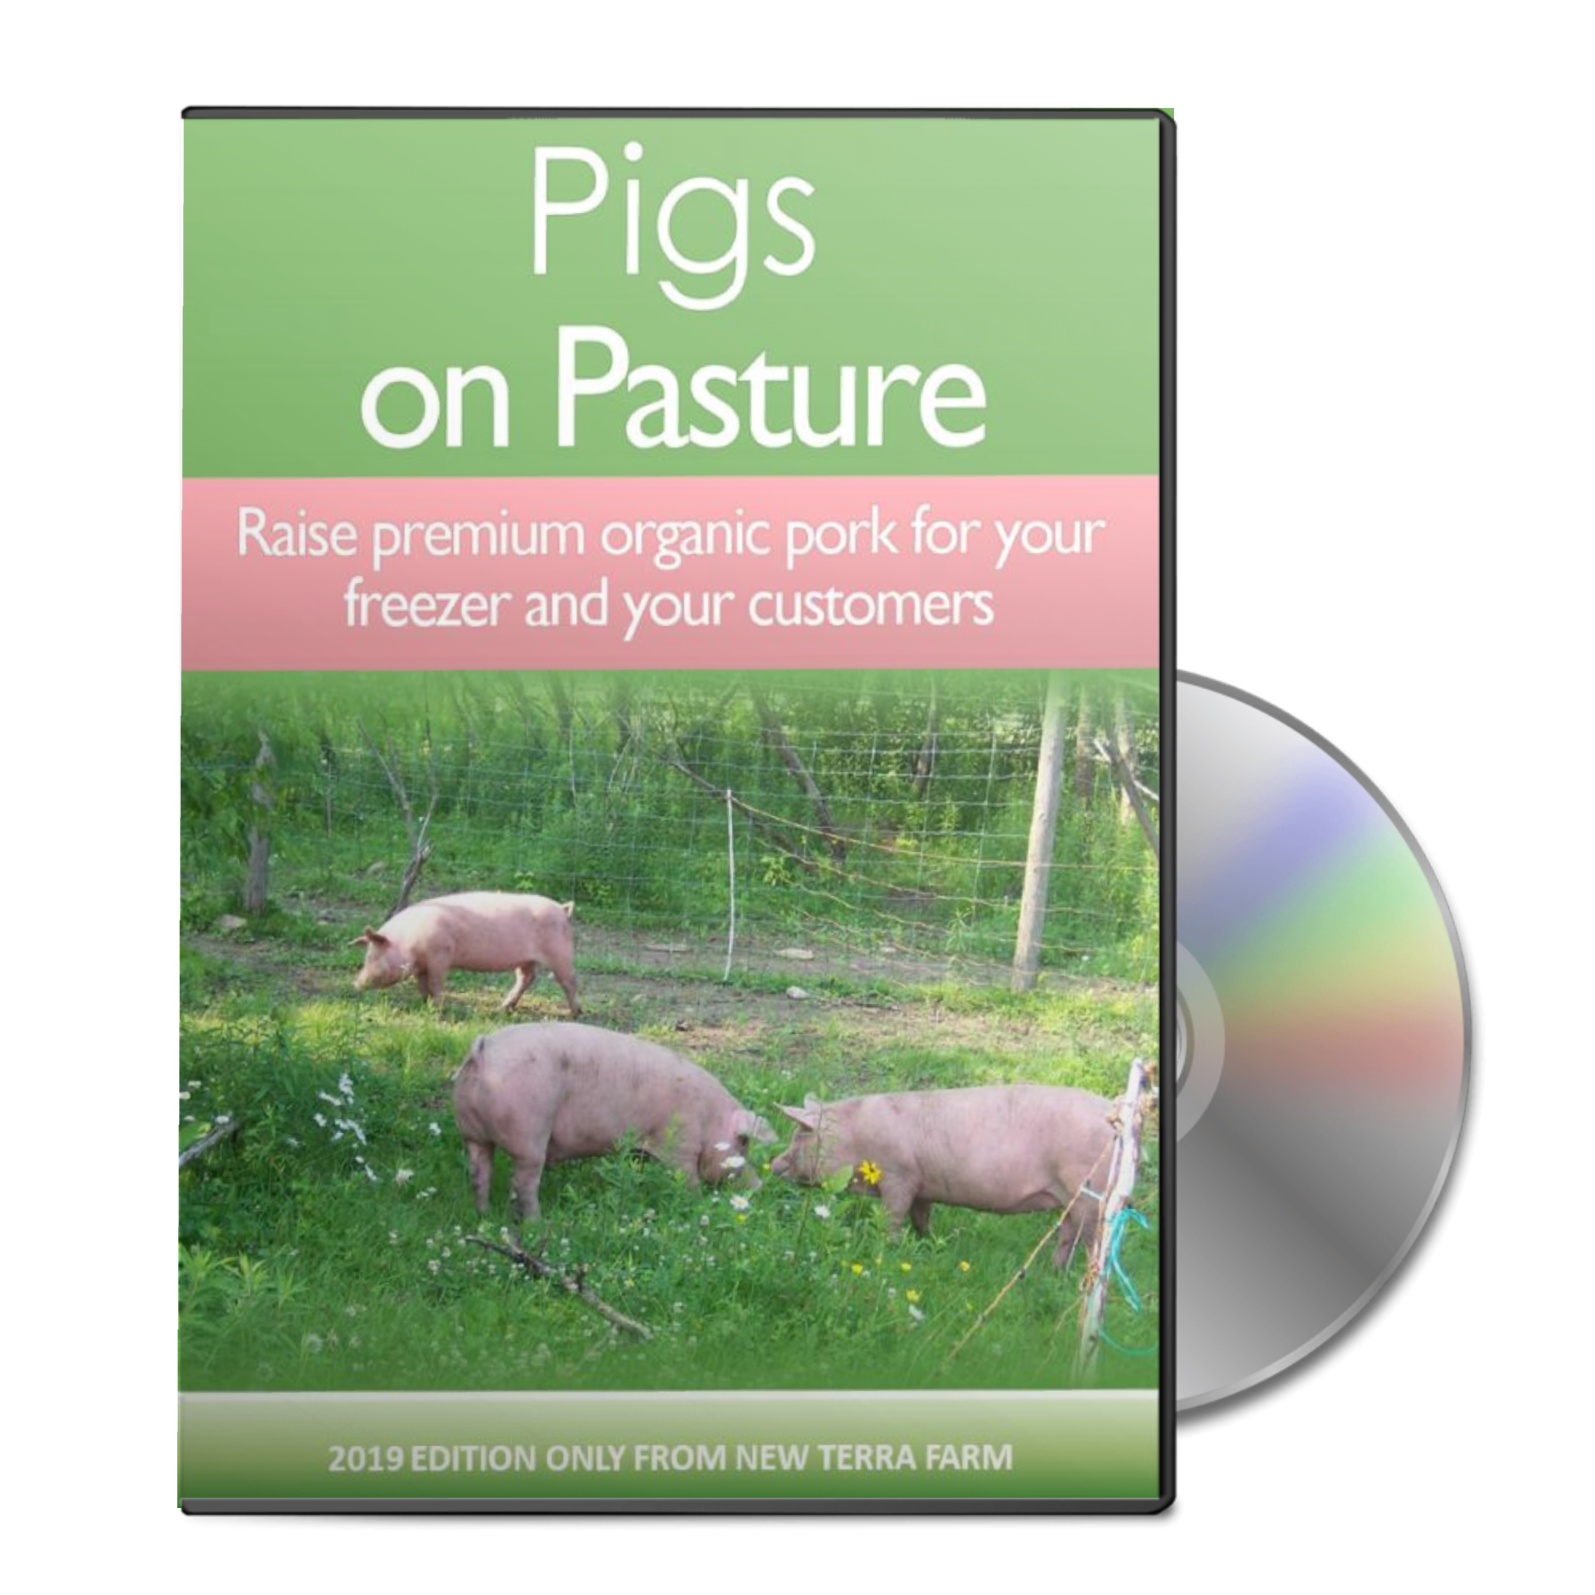 How to raise a pig on pasture book